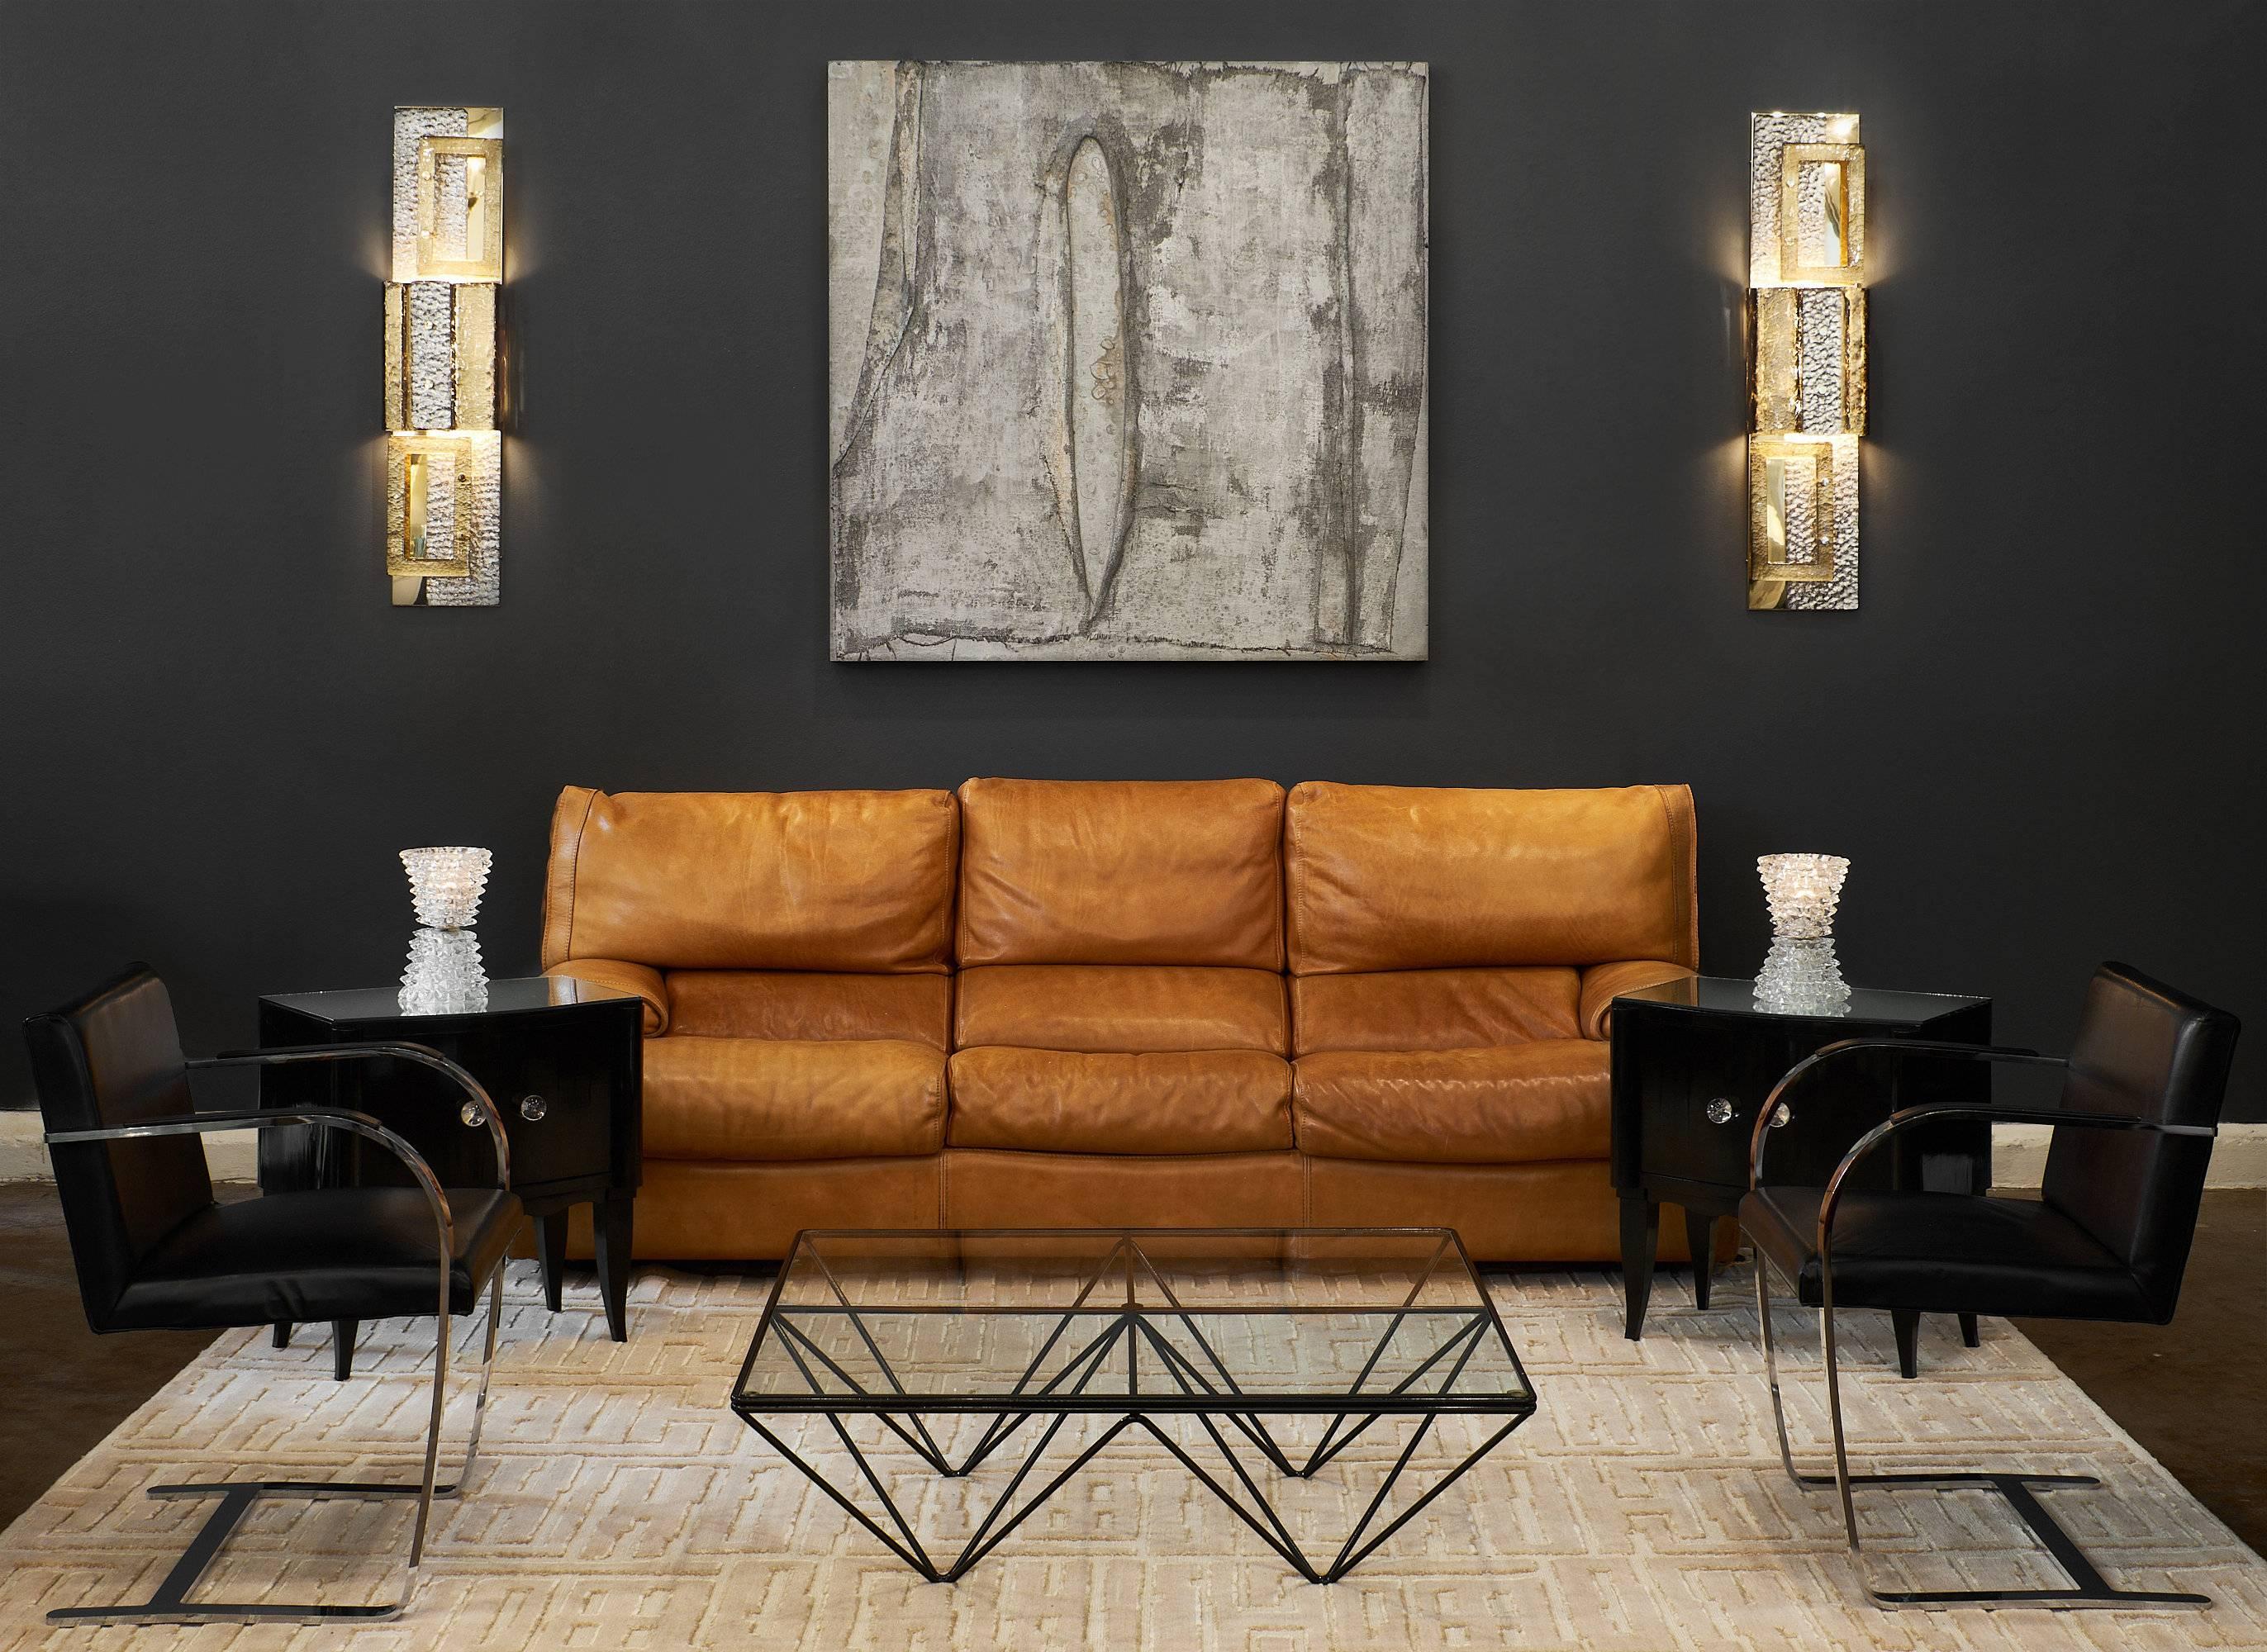 Important pair of geometric Murano glass gold sconces. These fixtures involve various techniques of stamped glass, golf leafing, and silver leafing. We loved the oversized sculptural impact of these sconces and the ultra modern combination of